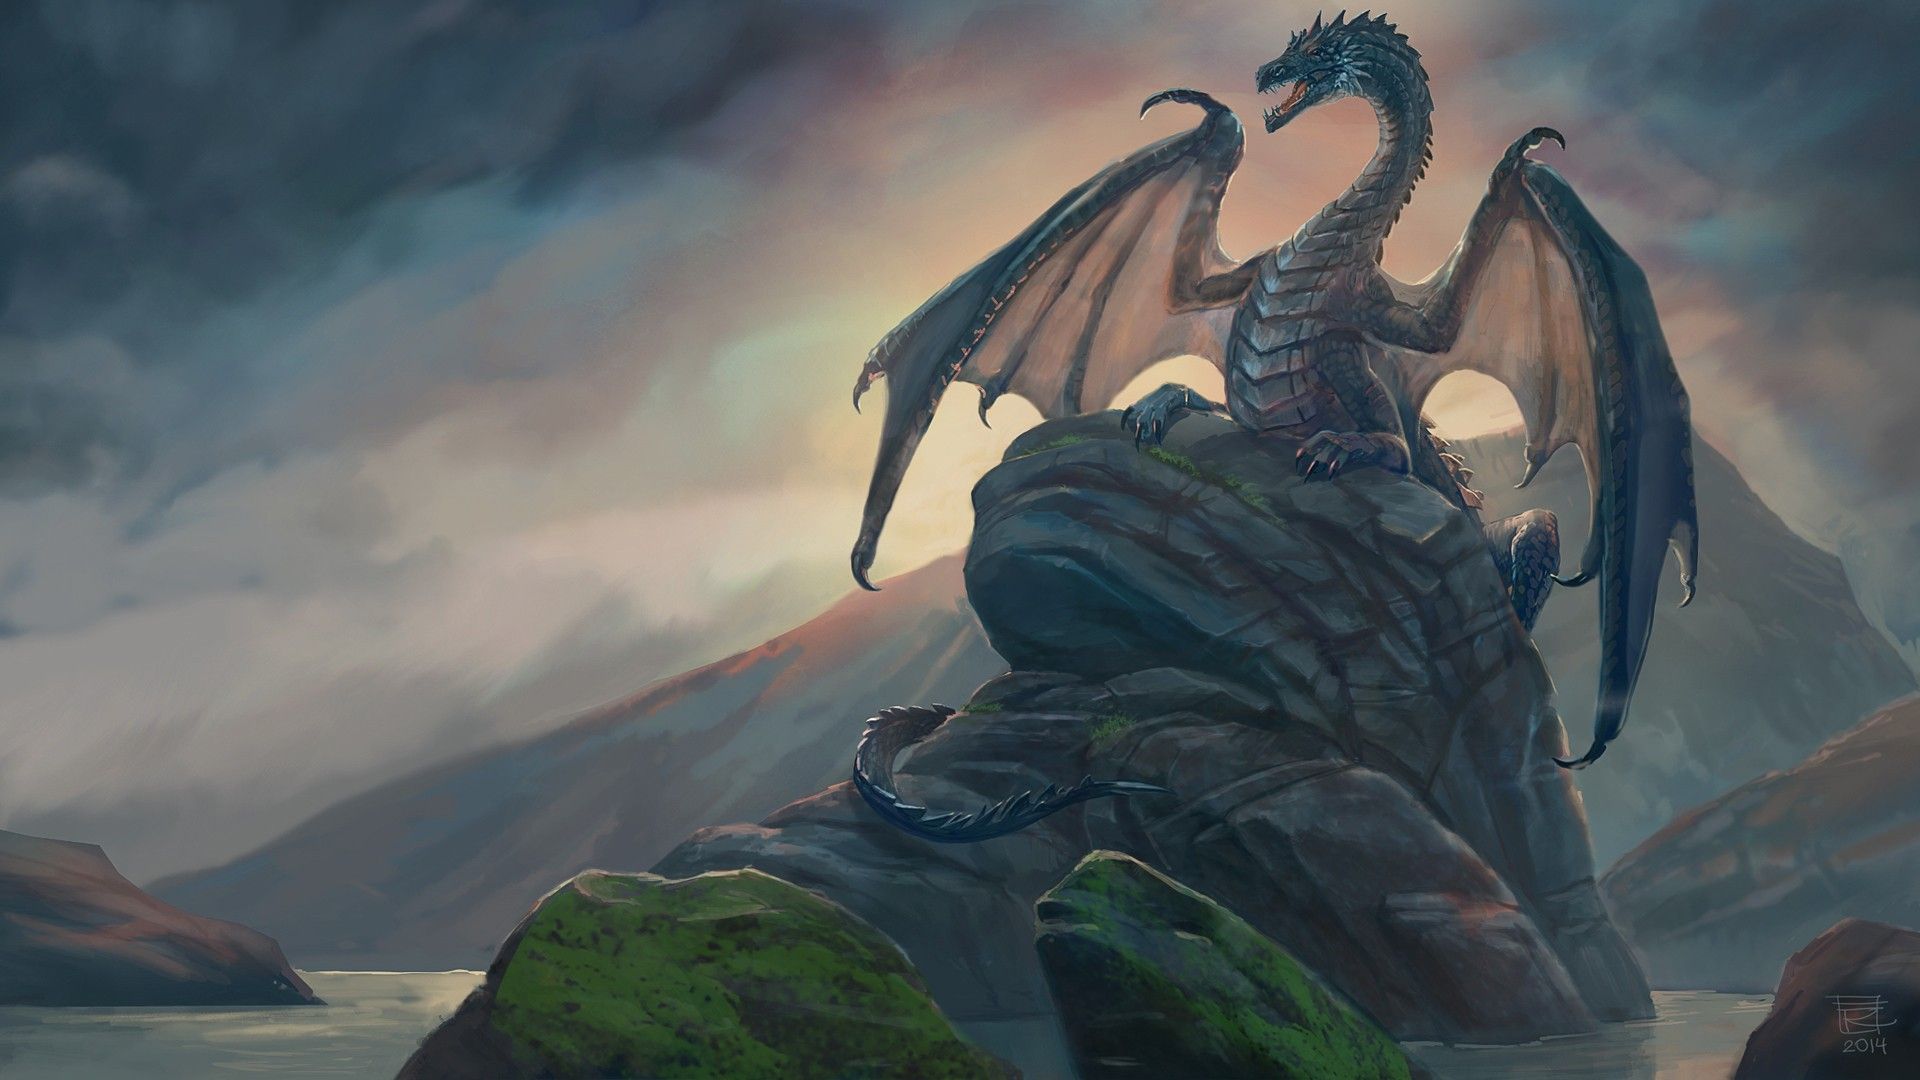 Dragon sitting on a rock wallpaper and image, picture, photo